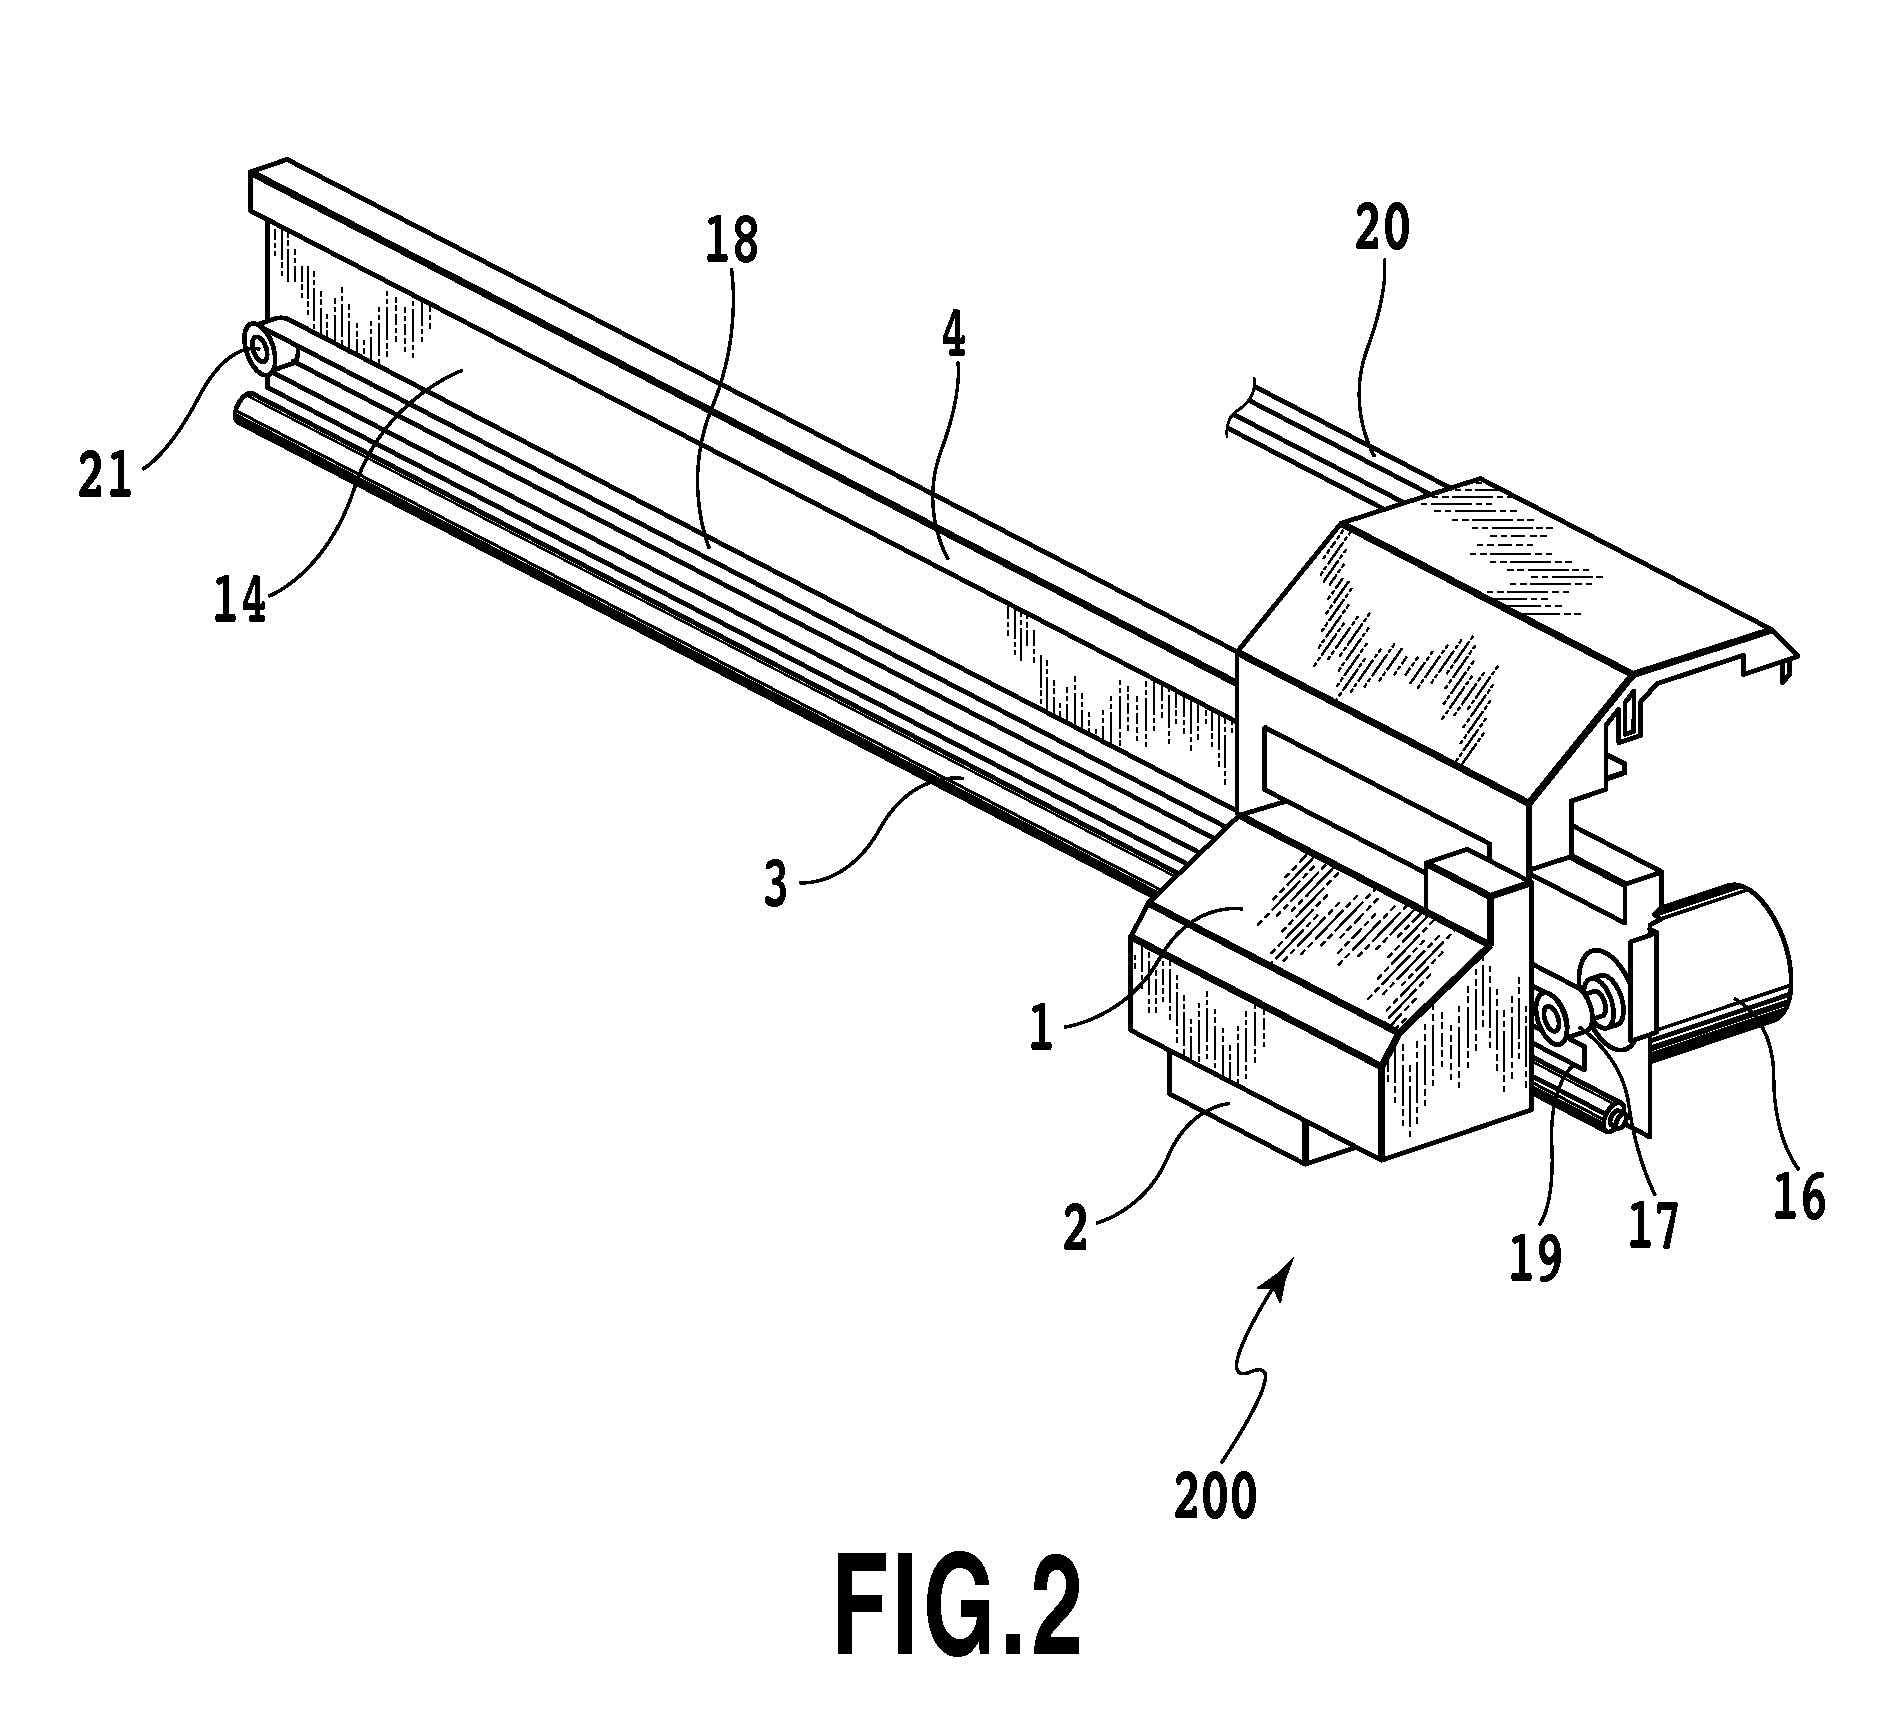 Ink jet printing apparatus and method of controlling ink jet printing apparatus